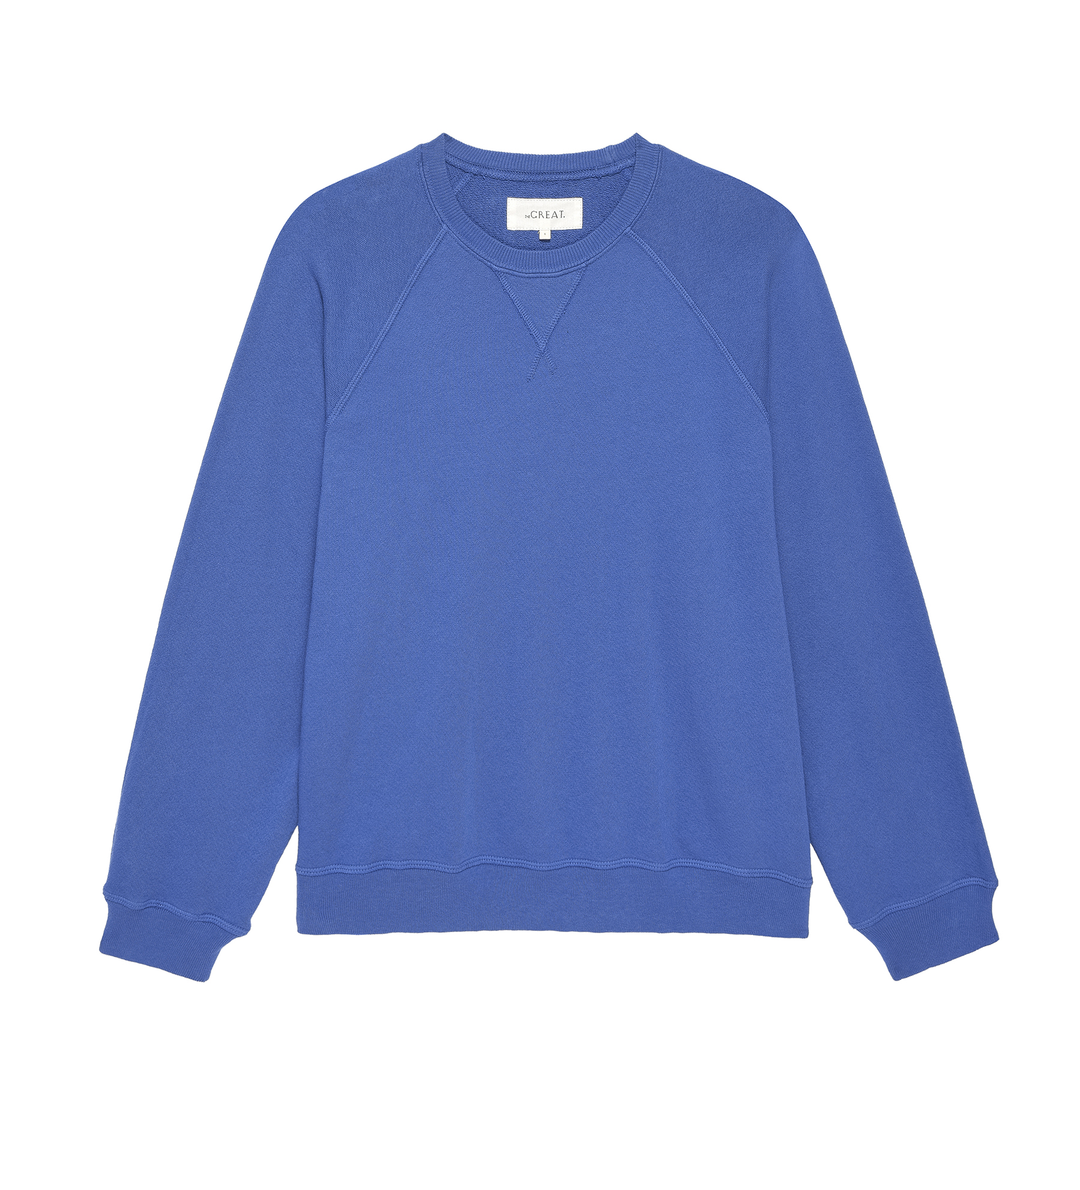 The Great - The Slouch Sweatshirt in Glacier Blue